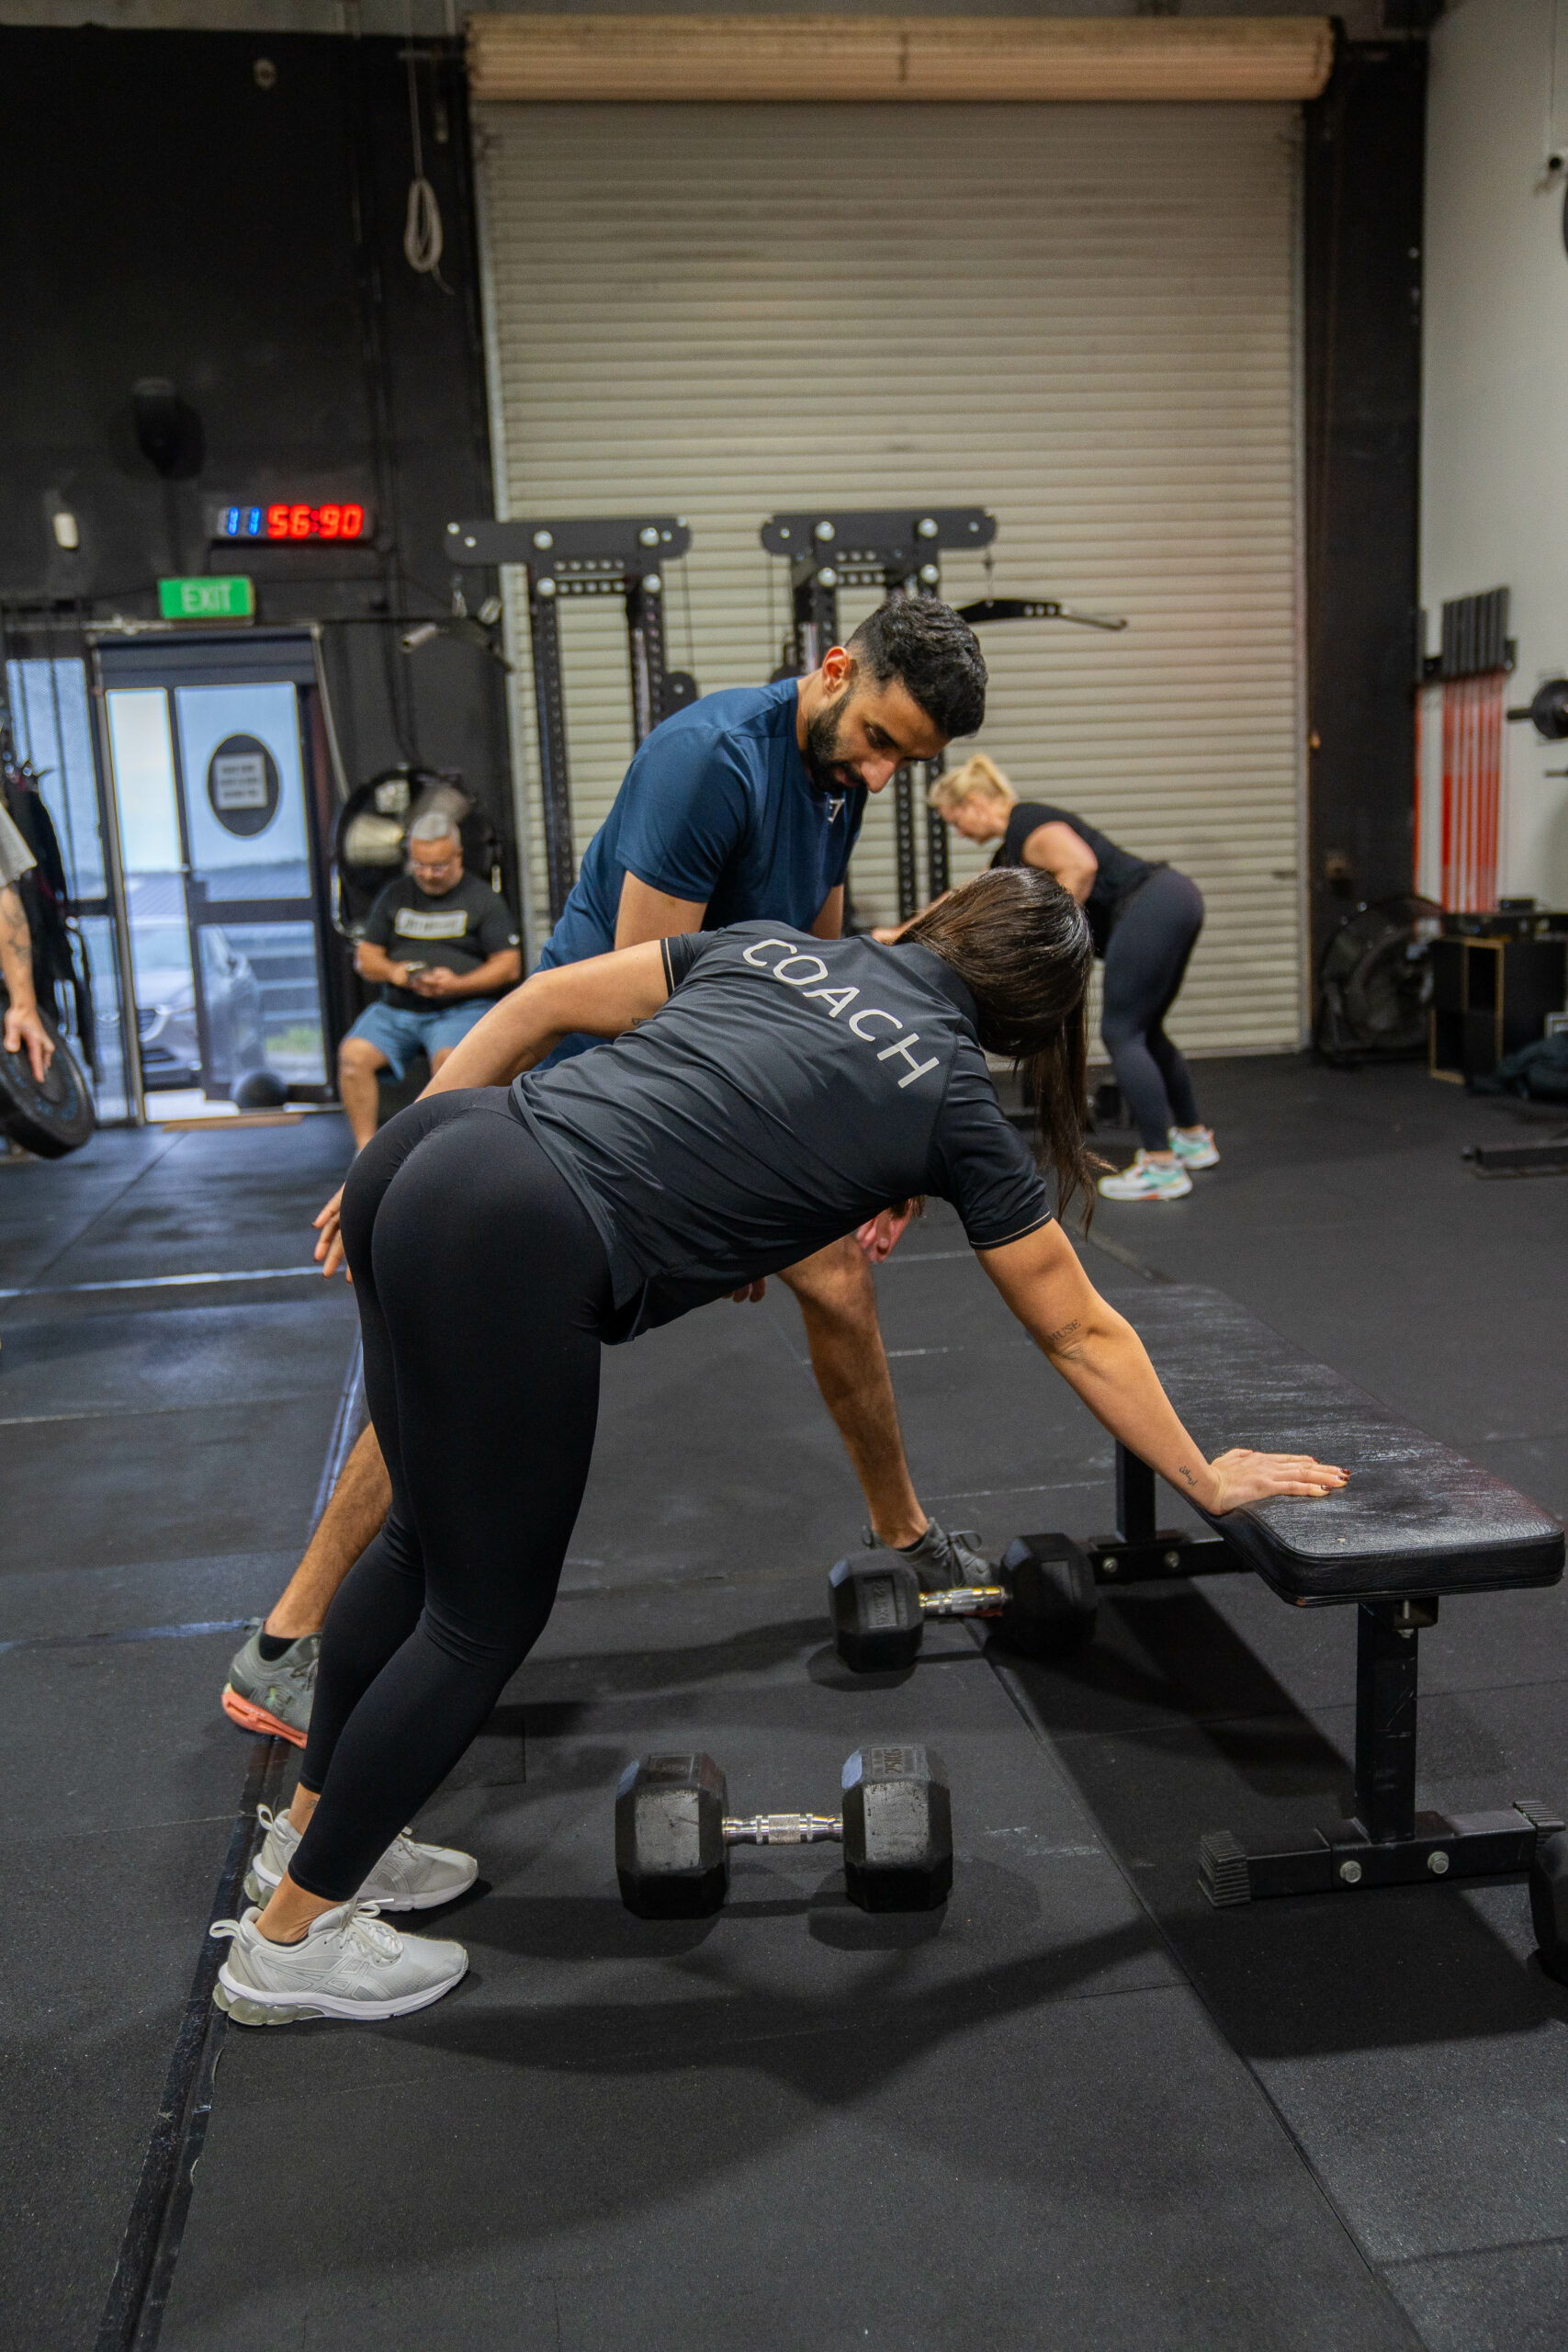 Read more about the article The Rise of Online Fitness: Why Perth Residents are Choosing Online Strength & Conditioning Programs